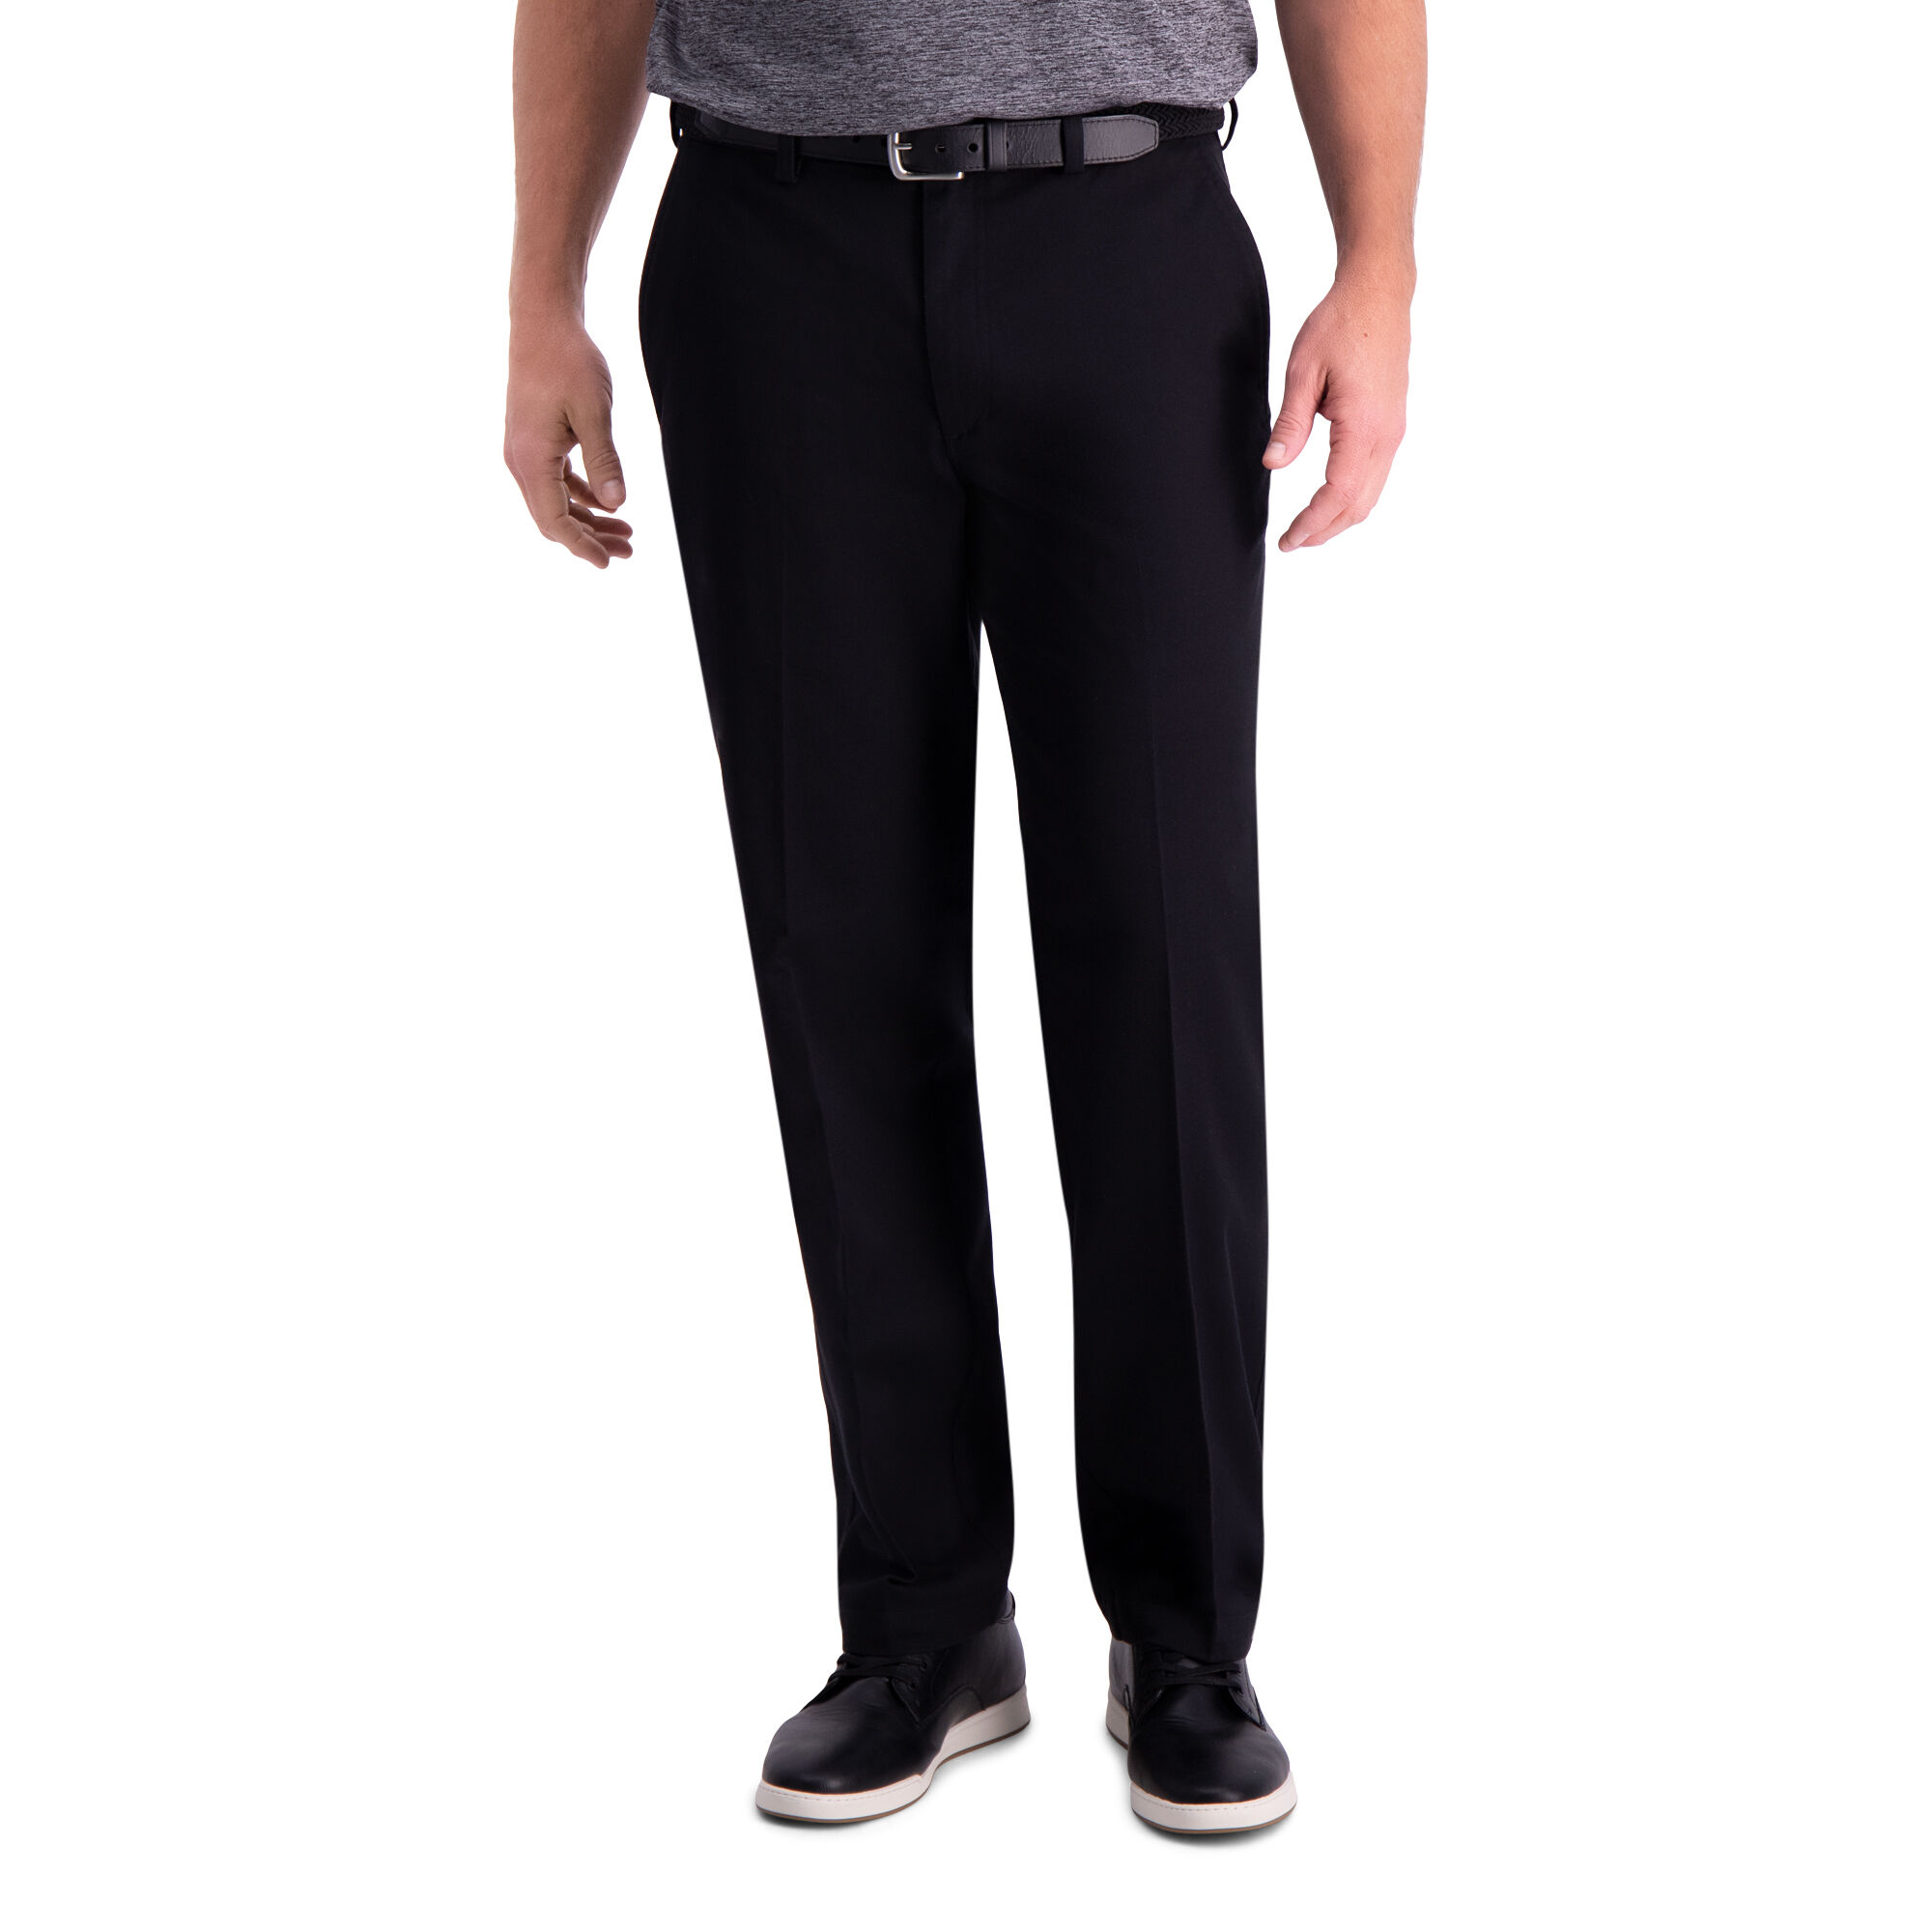 MUST WAY Mens Cotton Easy Classic Fit Flat Front Wrinkle Resistant Dress Pants 